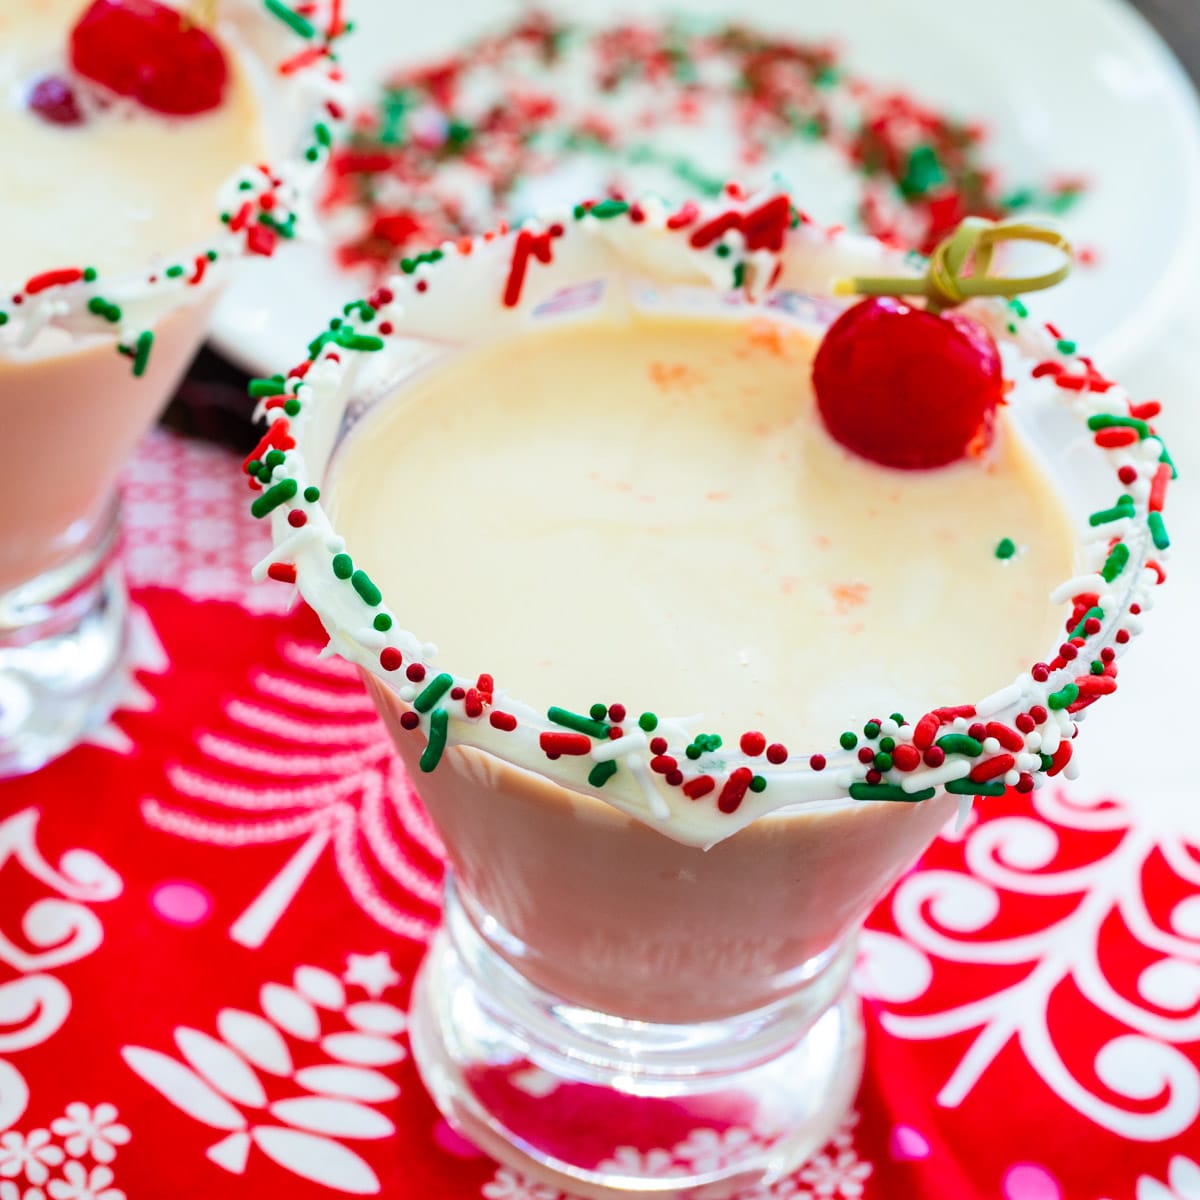 Sugar Cookie Martini in glass with sprinkles on rim.